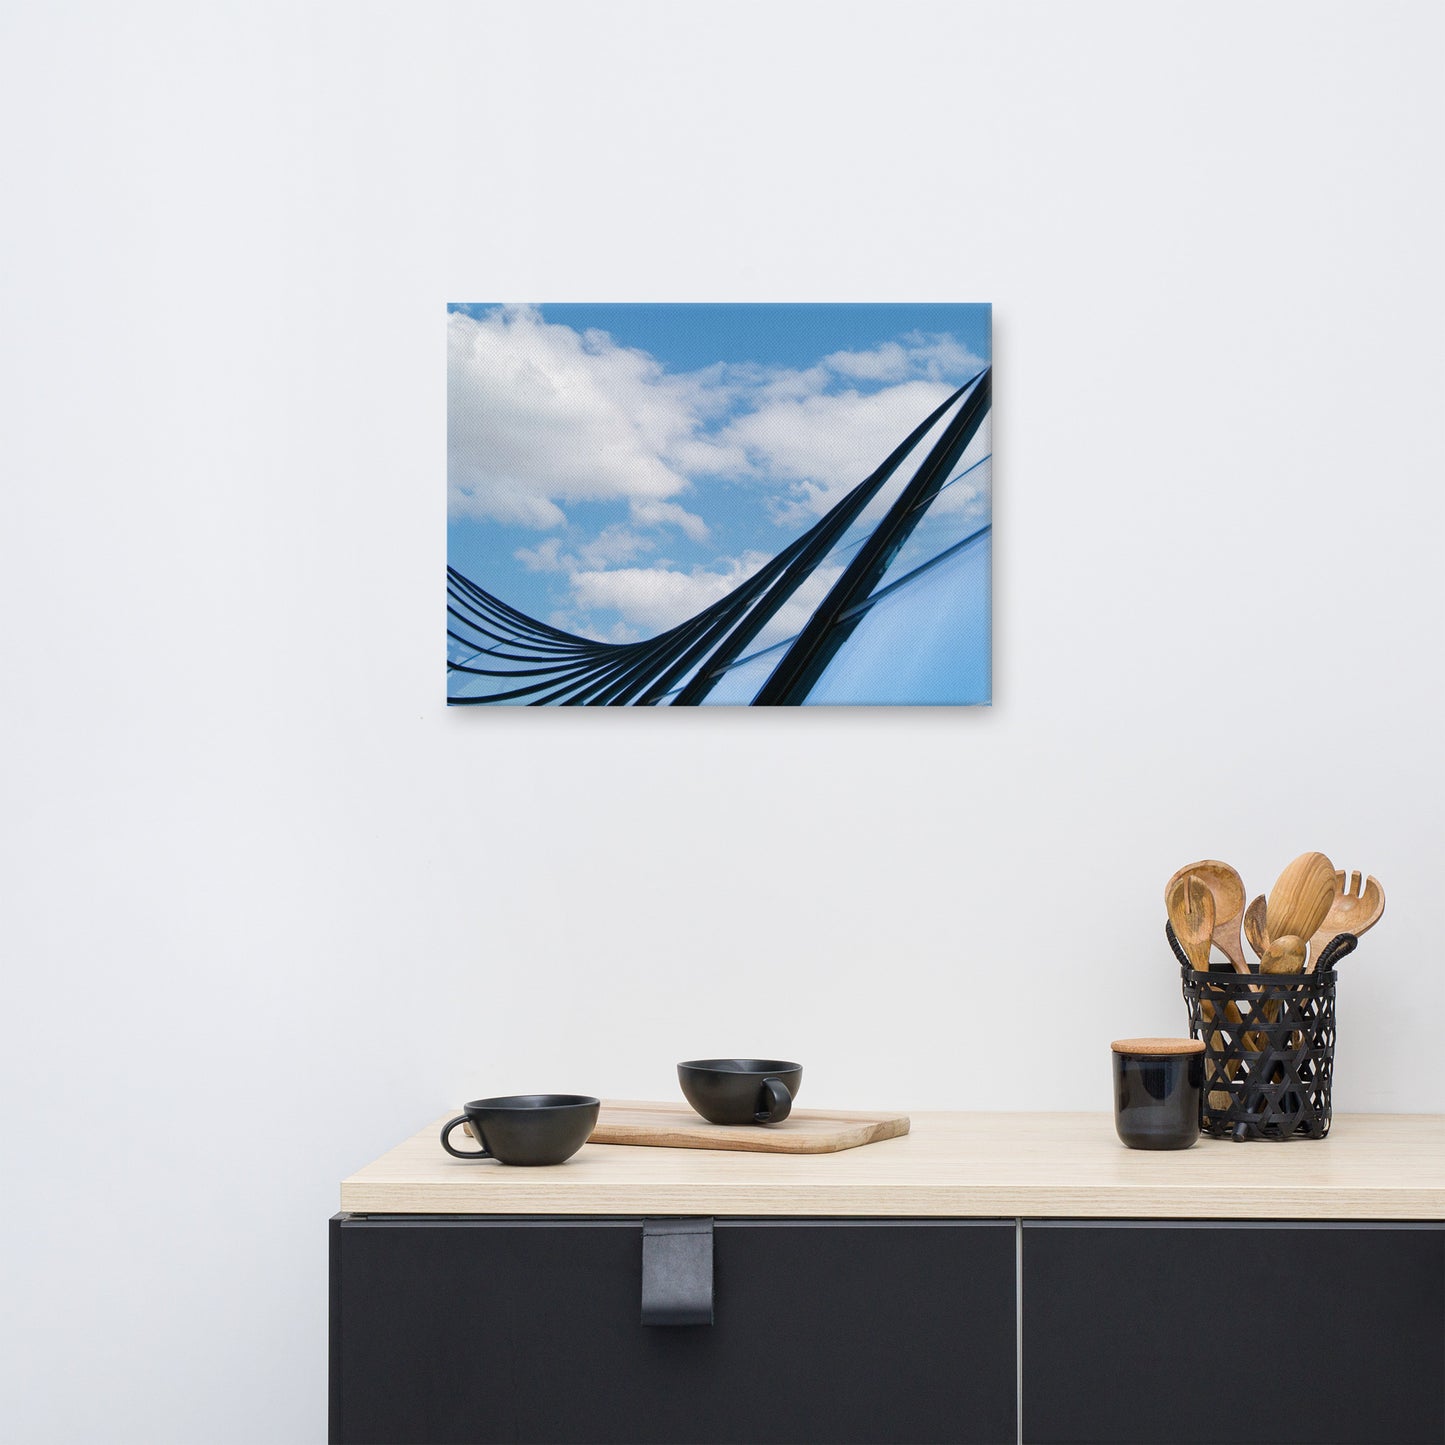 Glass and Azure Architectural Photograph Canvas Wall Art Print